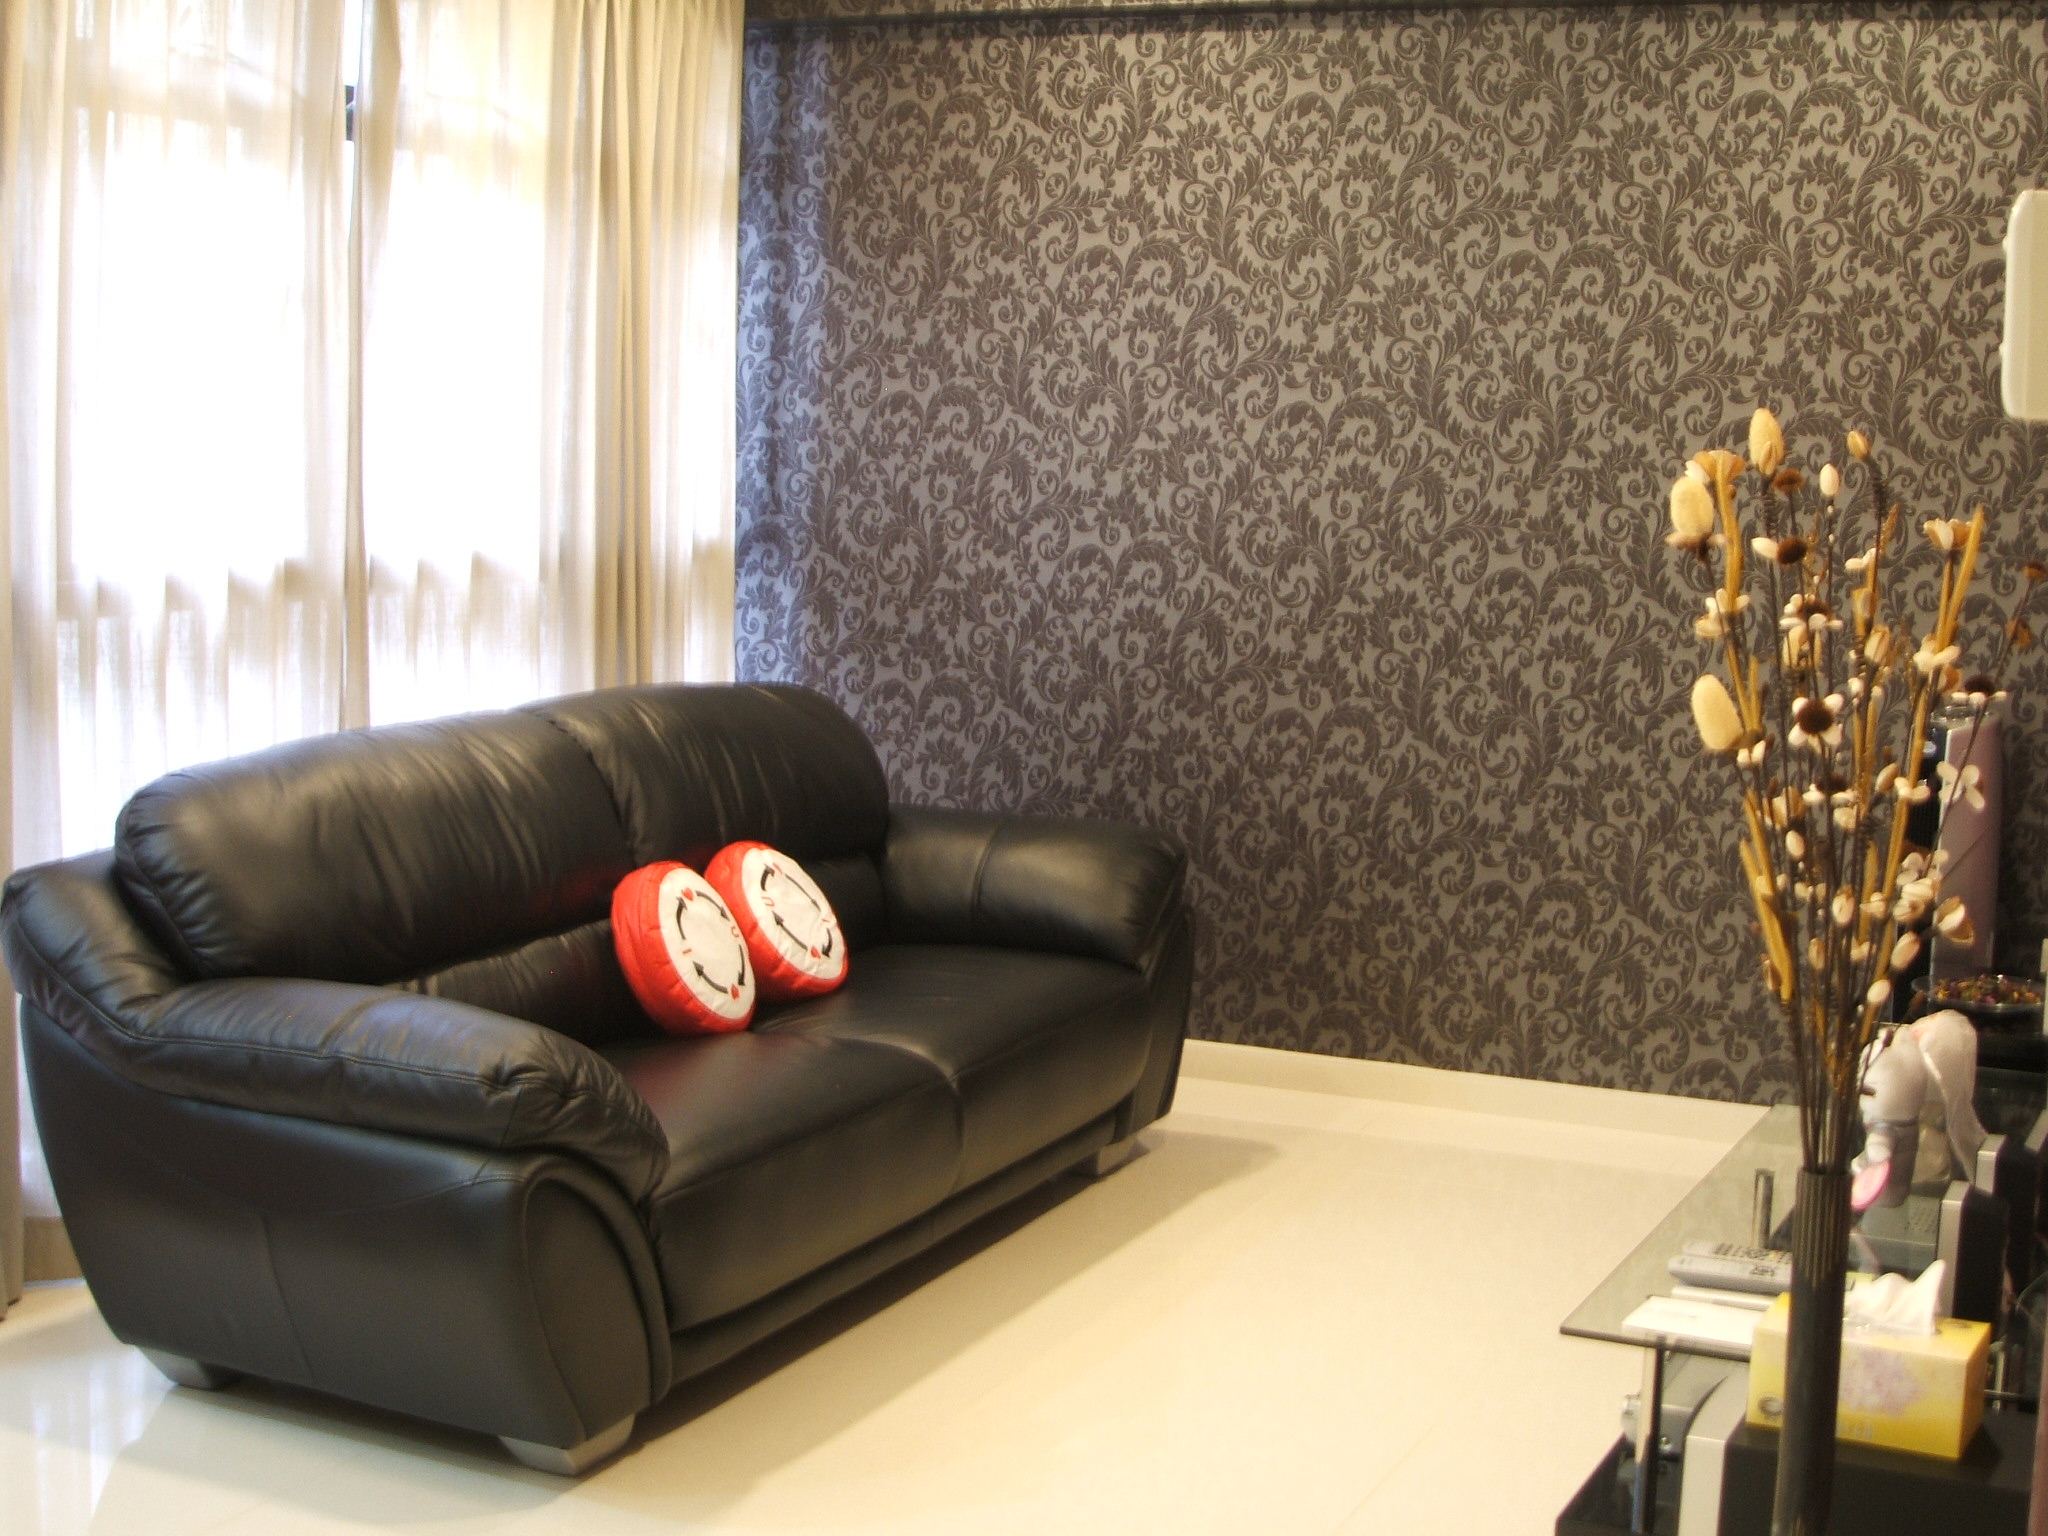 Our furniture is mostly black to complement our contemporary theme